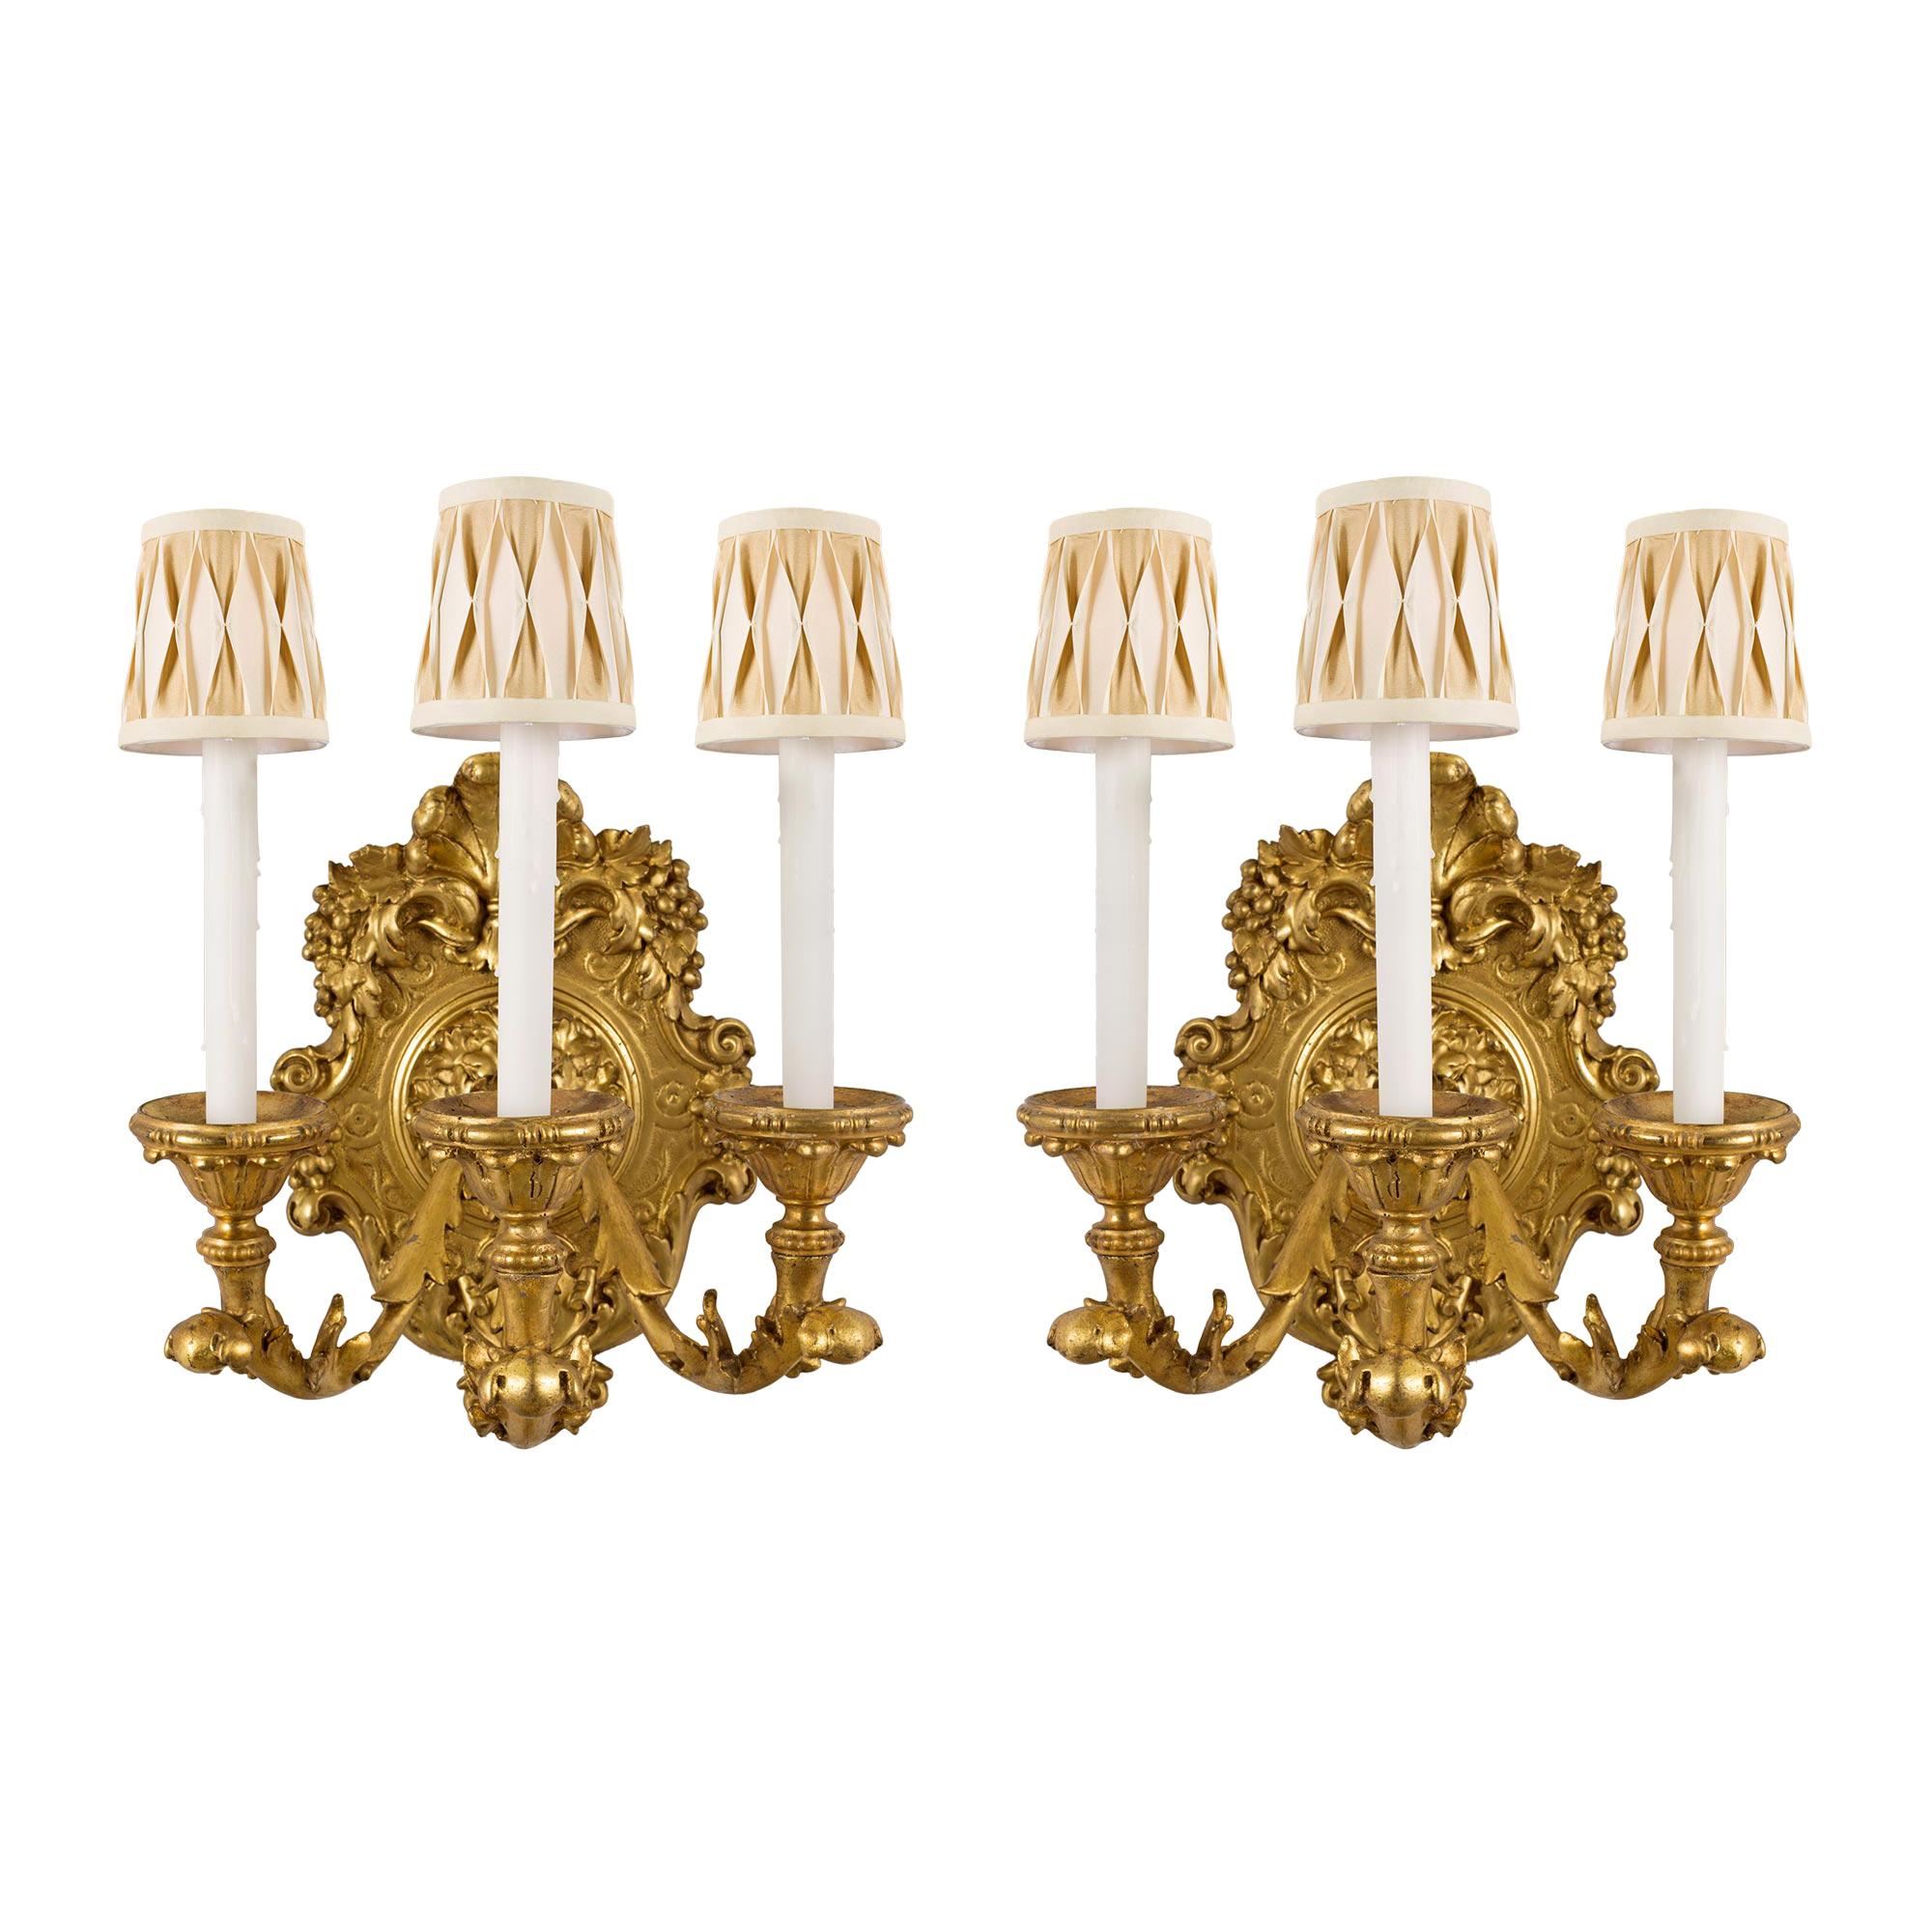 Pair of Italian Early 19th Century Louis XV Style Three-Arm Giltwood Sconces